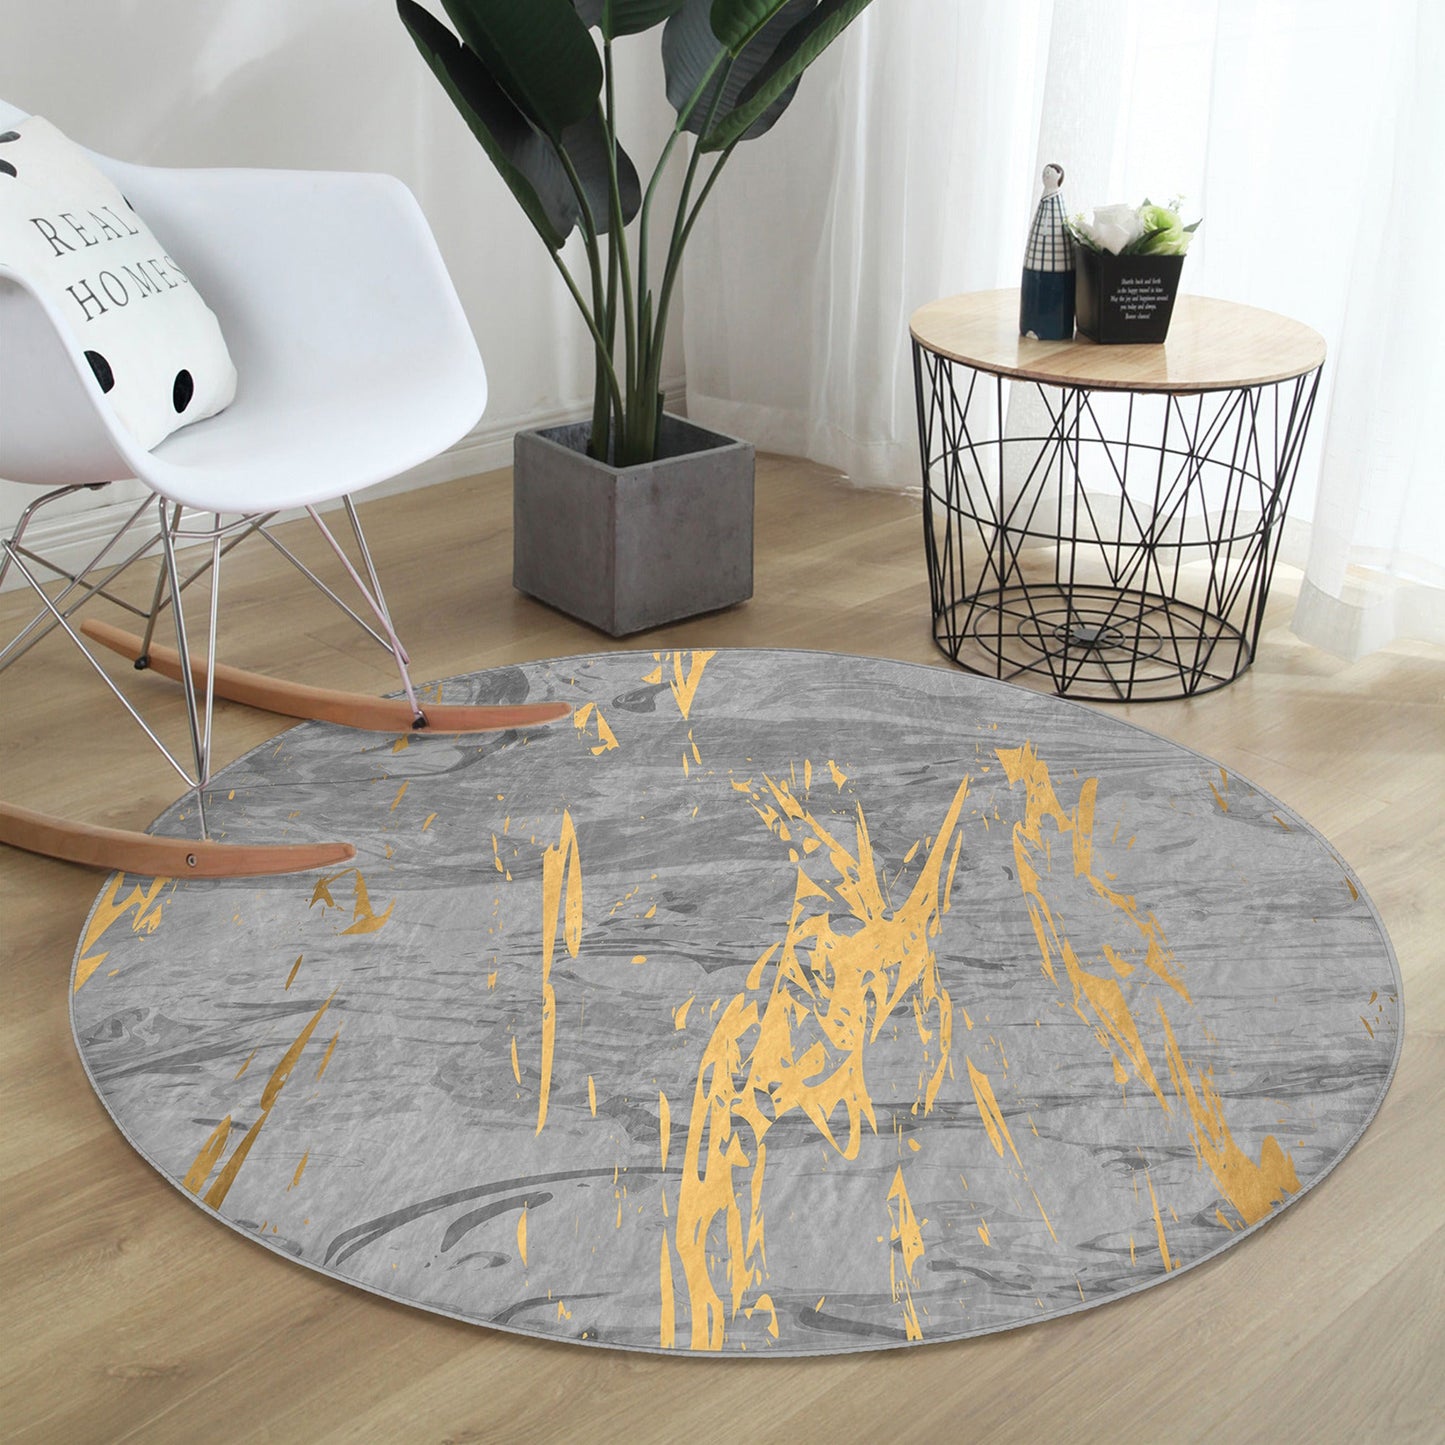 Gray Marble Patterned Round Rug, Luxury Living Room Area Rug, Bedroom